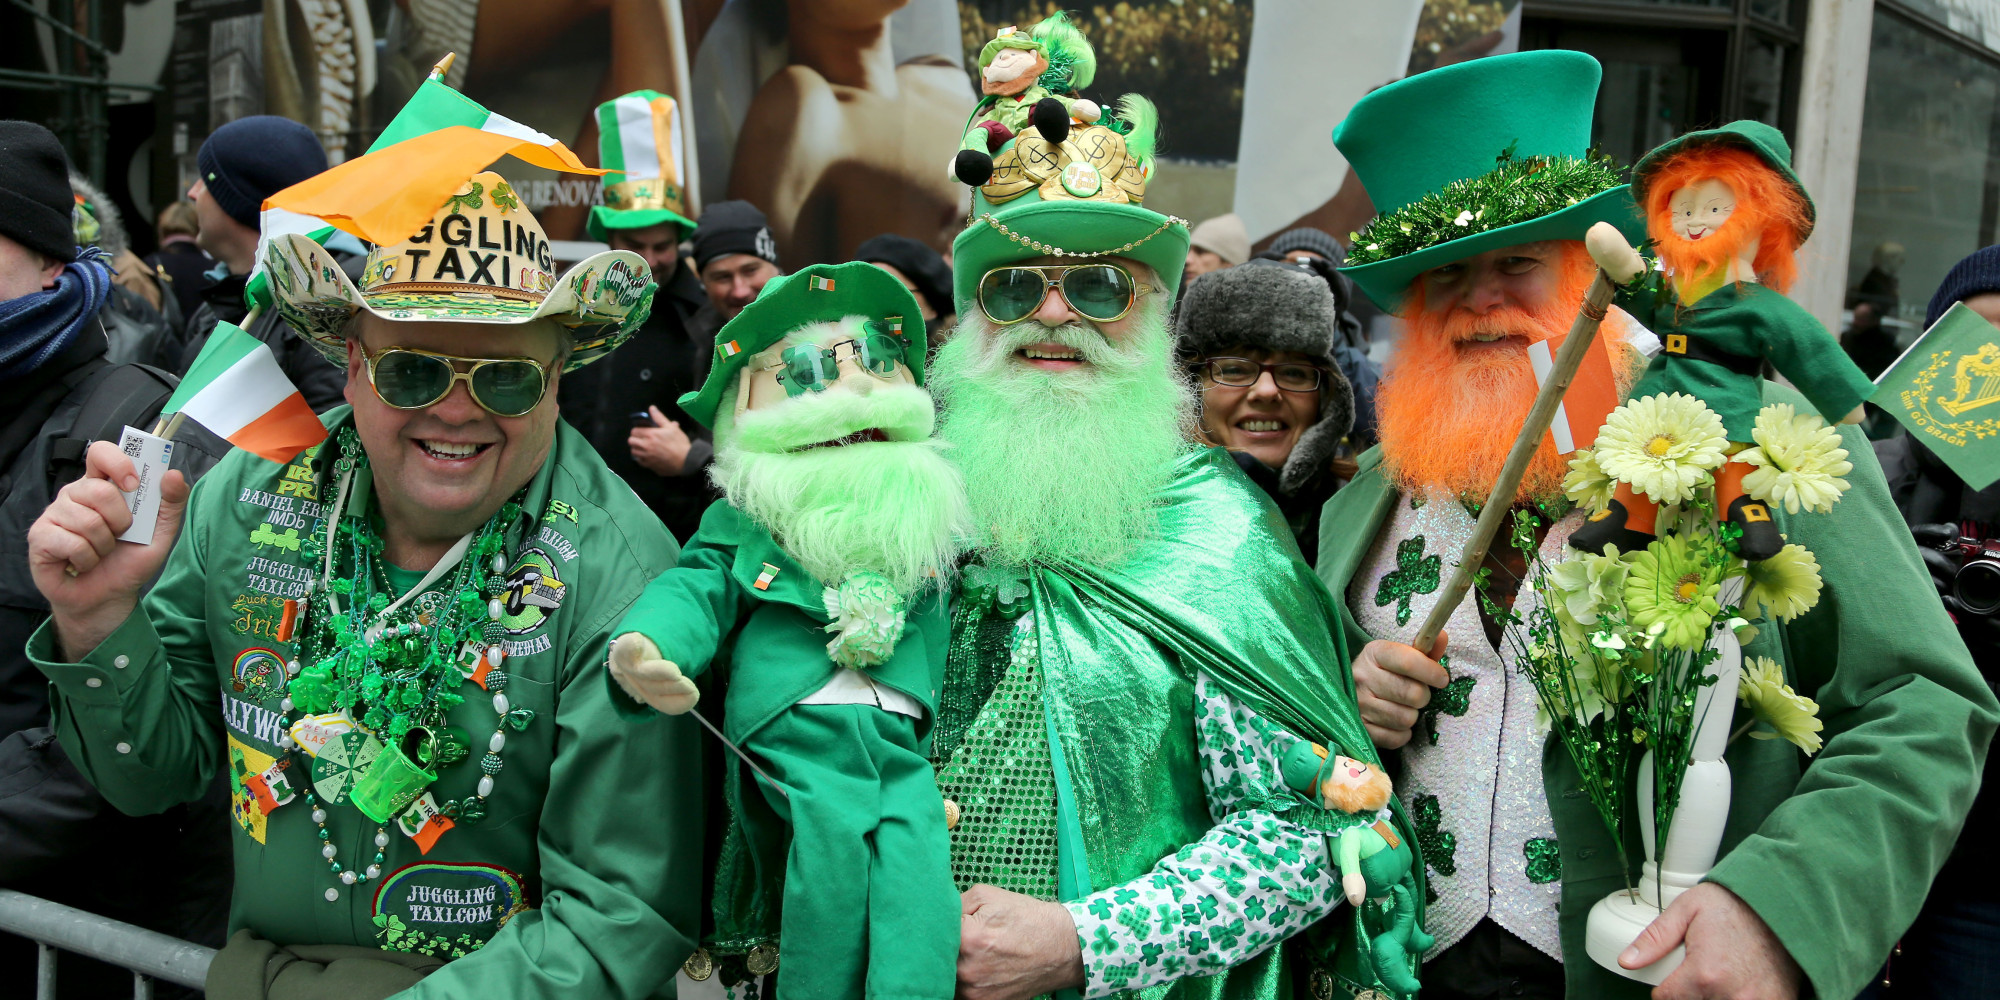 Saint Patrick's Day 2018 in Brussels Brussels Express